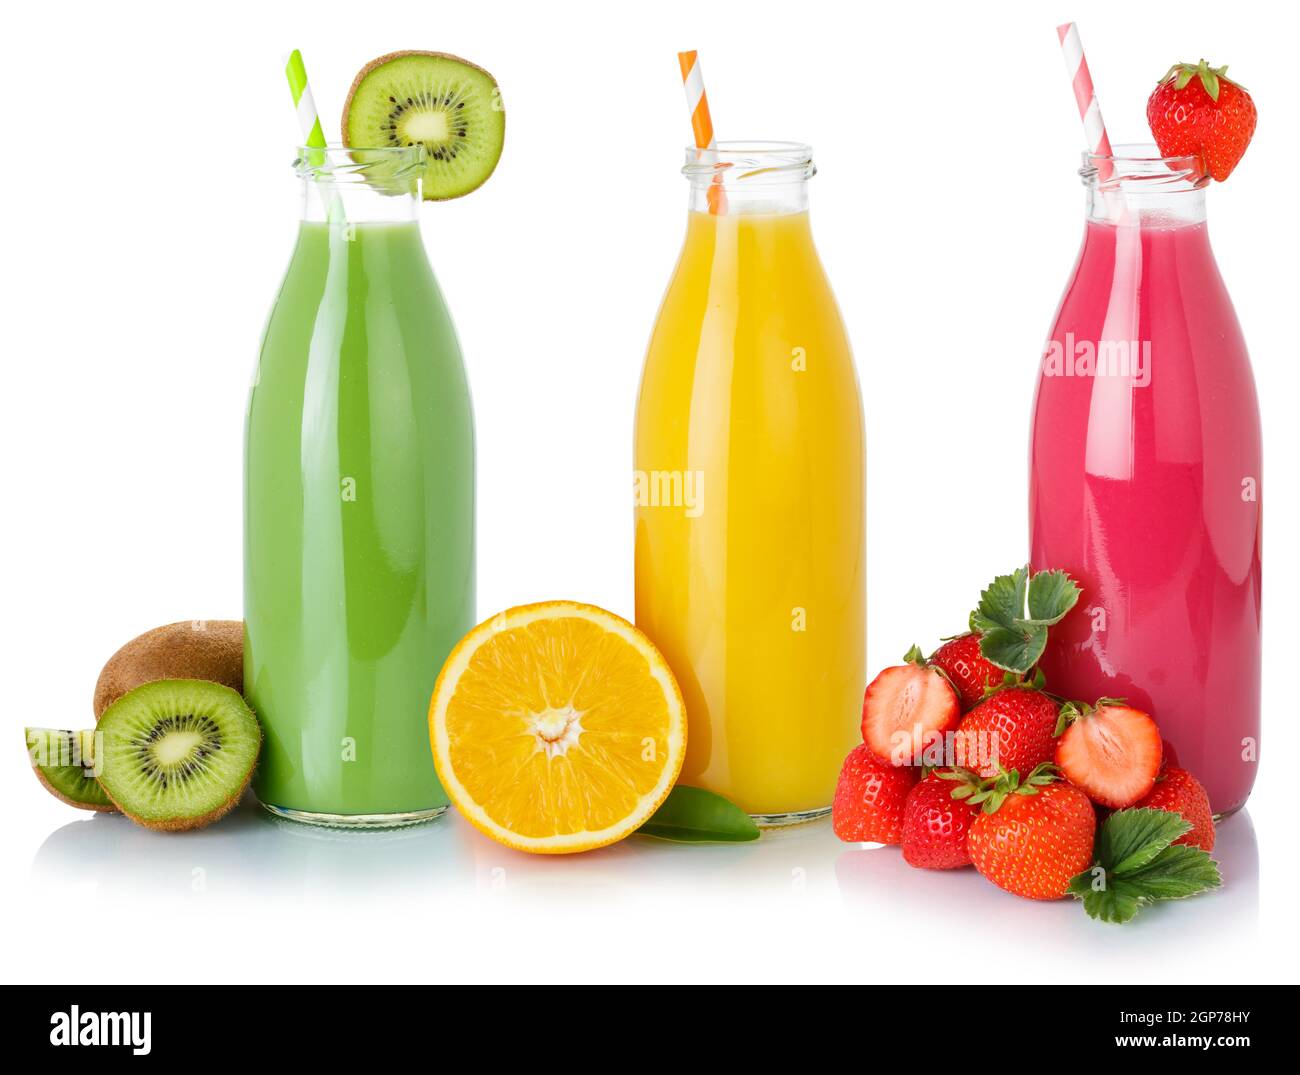 https://c8.alamy.com/comp/2GP78HY/fruit-smoothie-smoothies-juice-drink-drinks-straw-bottles-isolated-on-a-white-background-2GP78HY.jpg